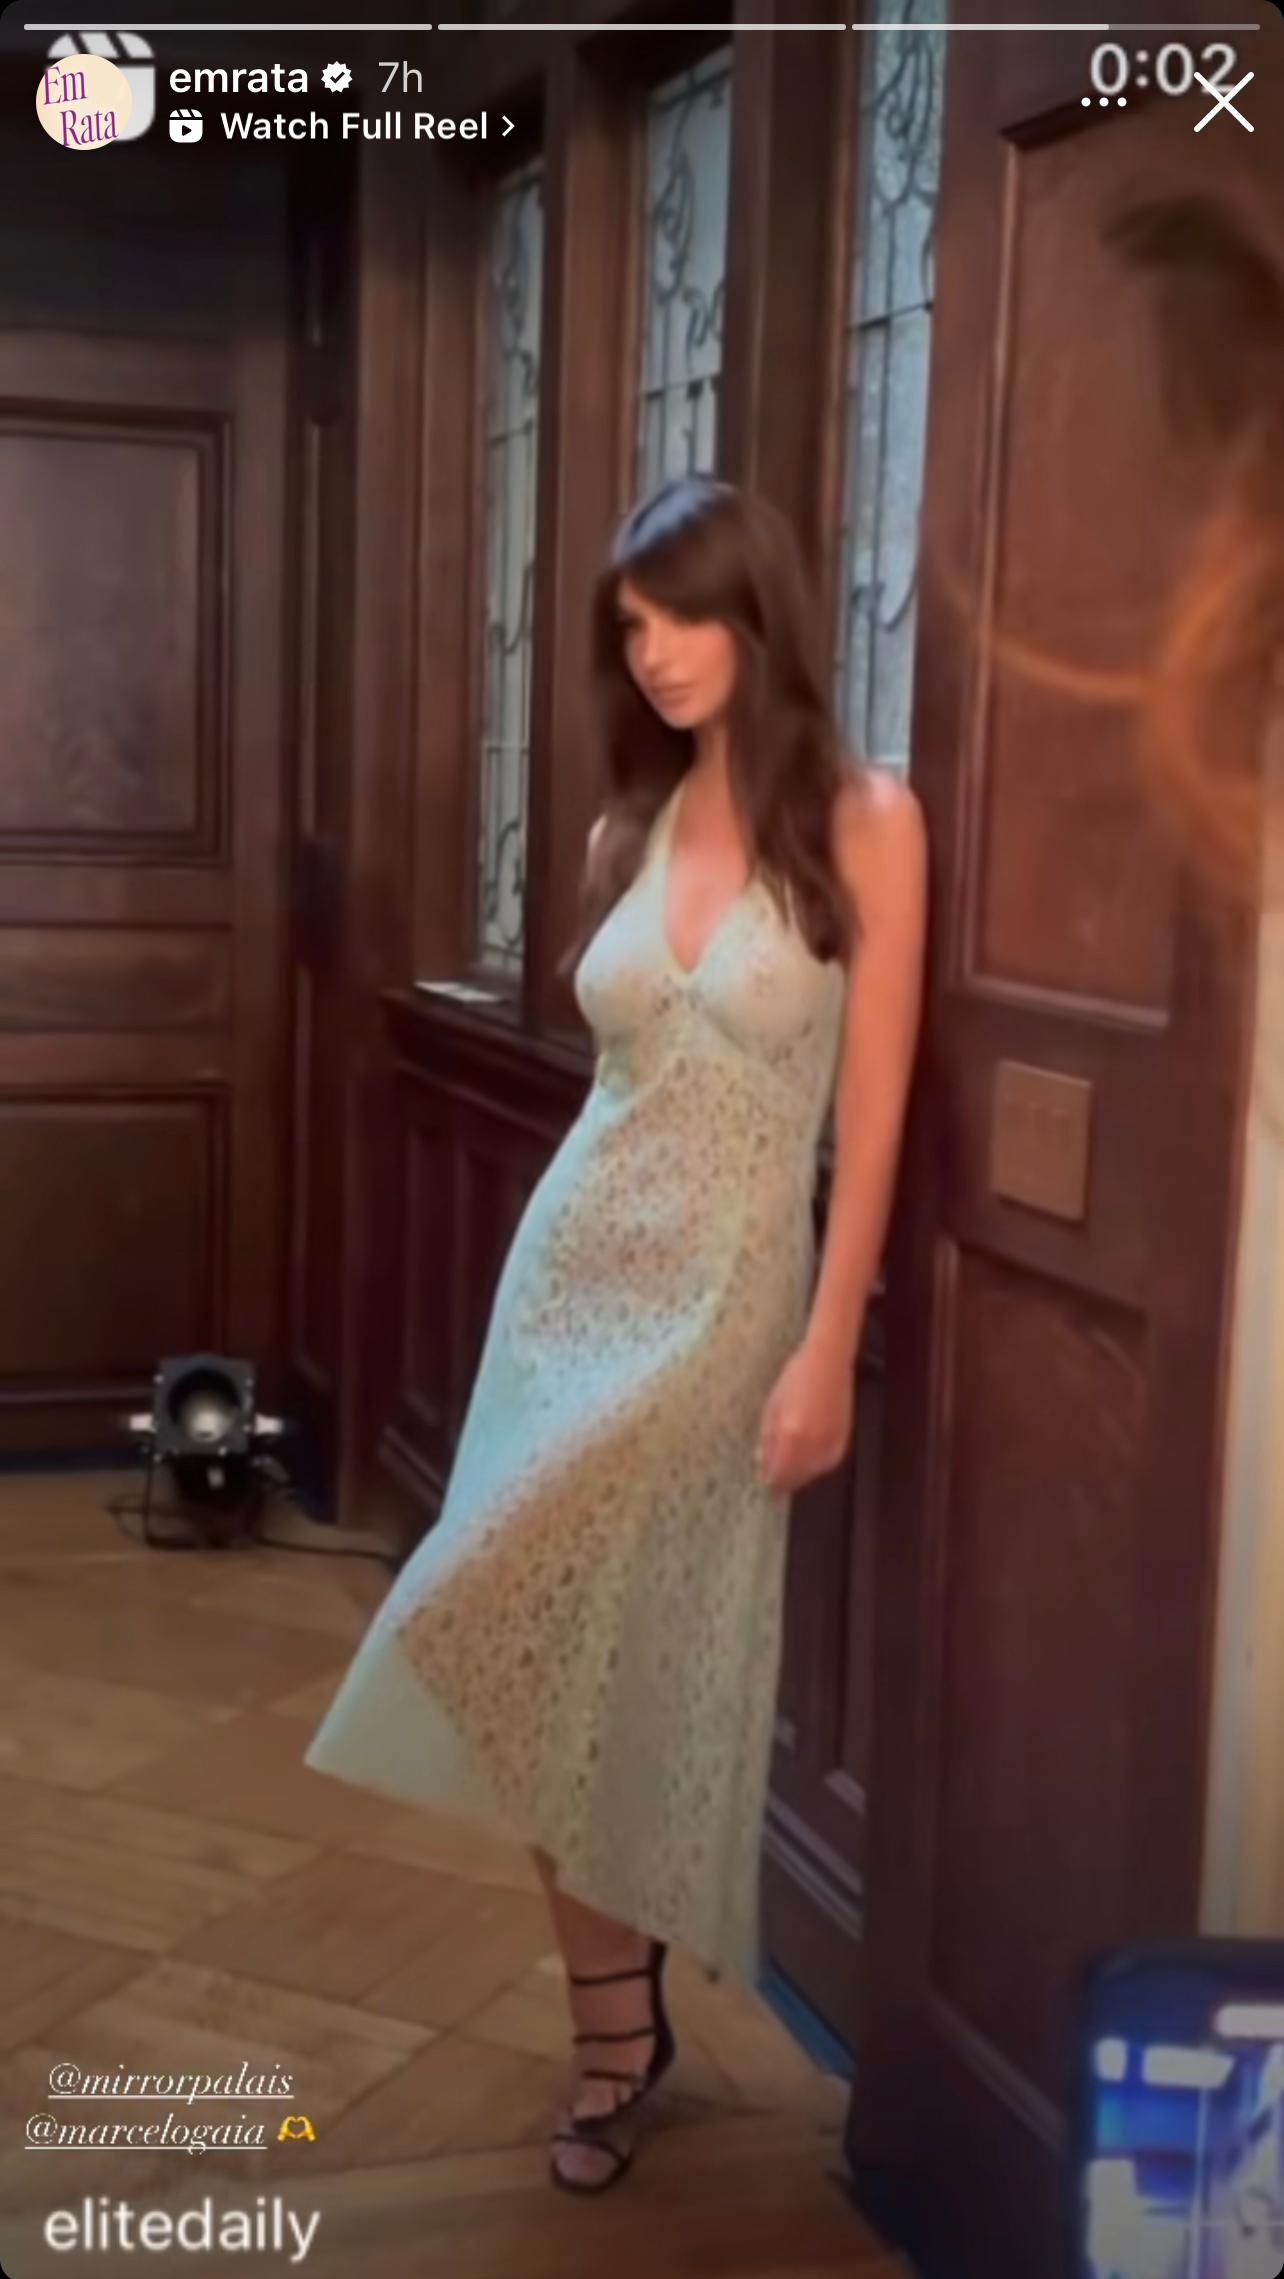 Emily Ratajkowski Poses For Cameras Wearing Nothing But A See-Through Gown